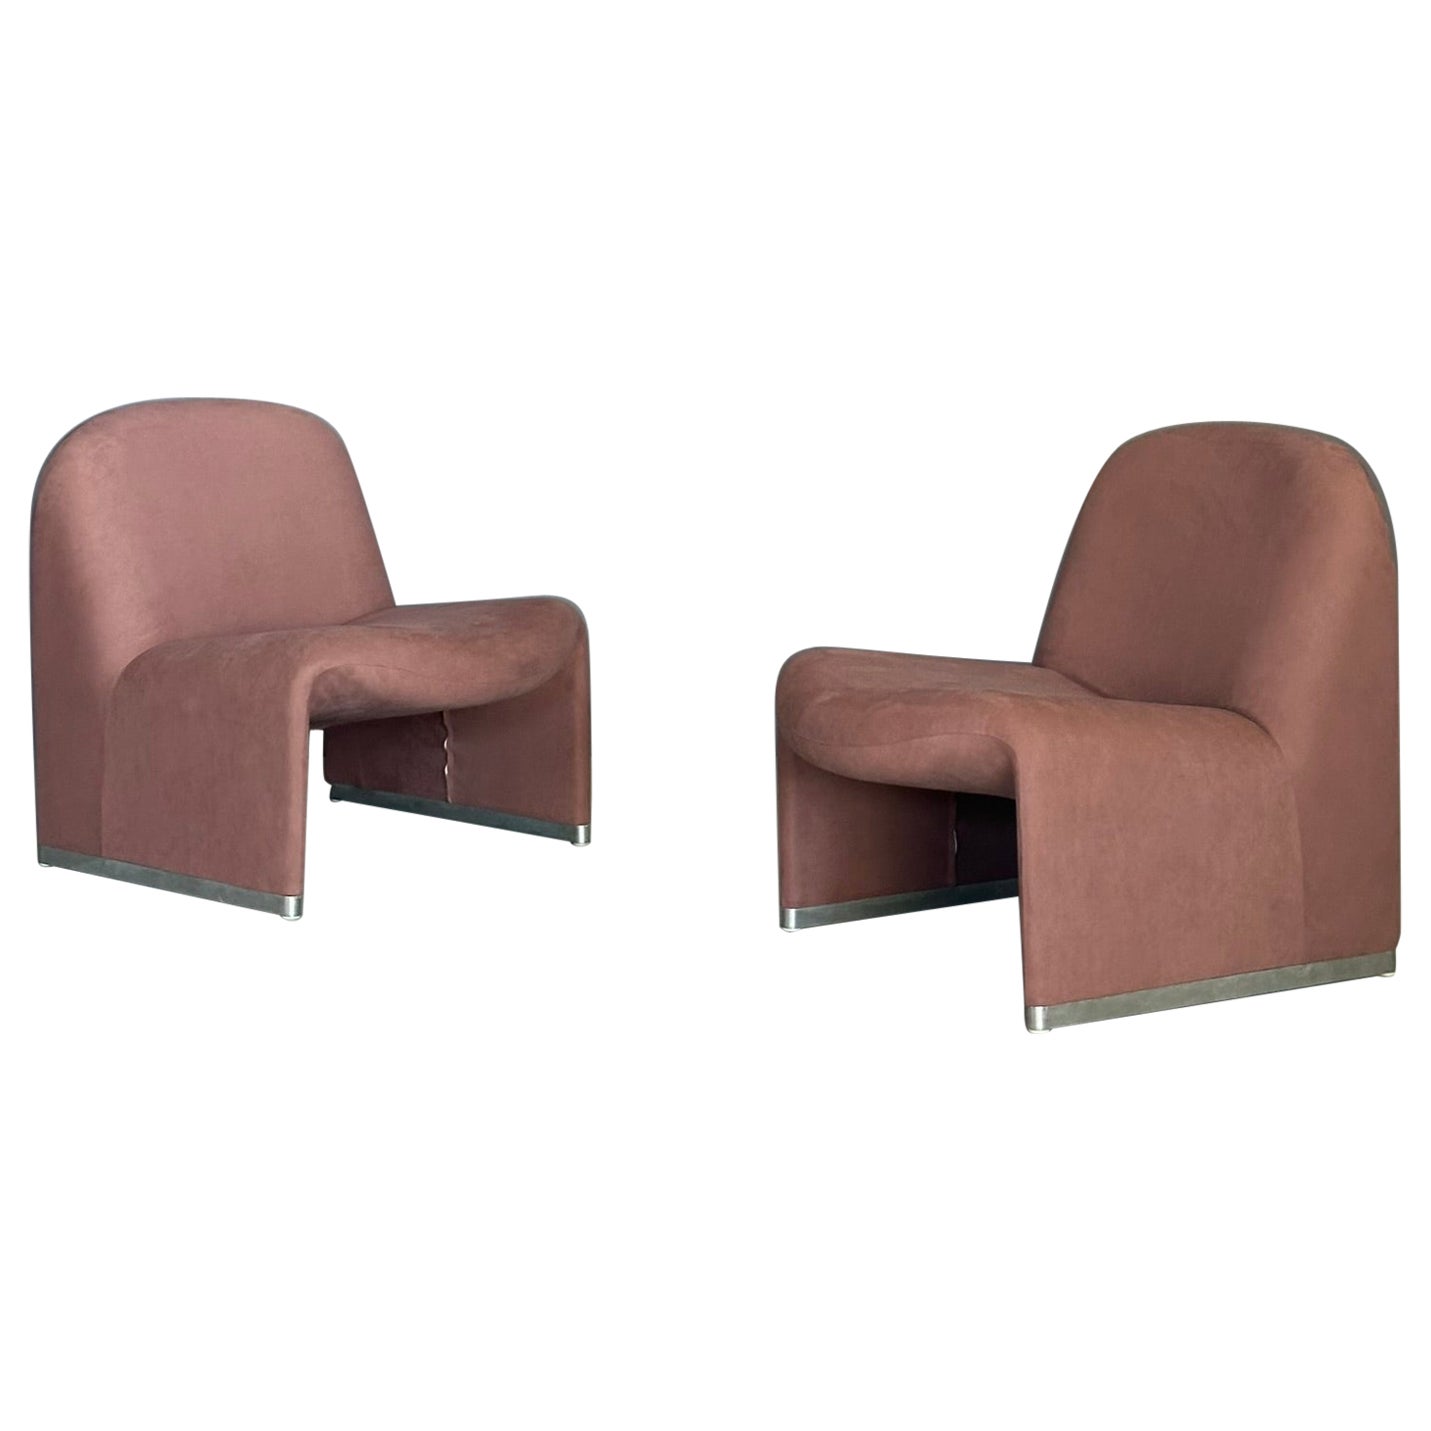 Pair of  'ALKY' armchairs design by Giancarlo Piretti for Anonima Castelli 1970 For Sale